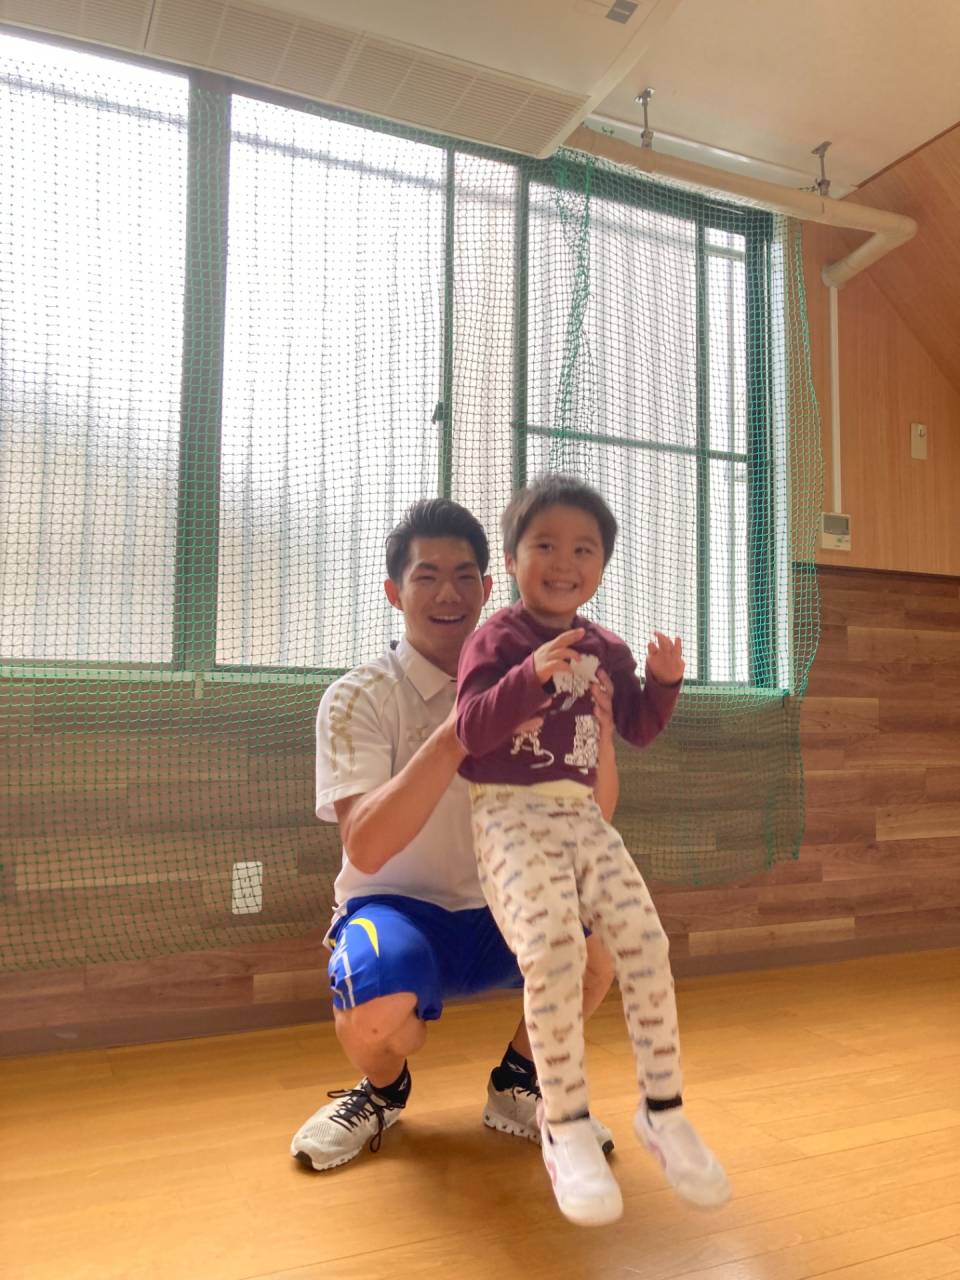 Indoor Exercise with Mr.Nakane!(中根先生とジムでのレッスン!)☆Kindy 1(年少クラス)